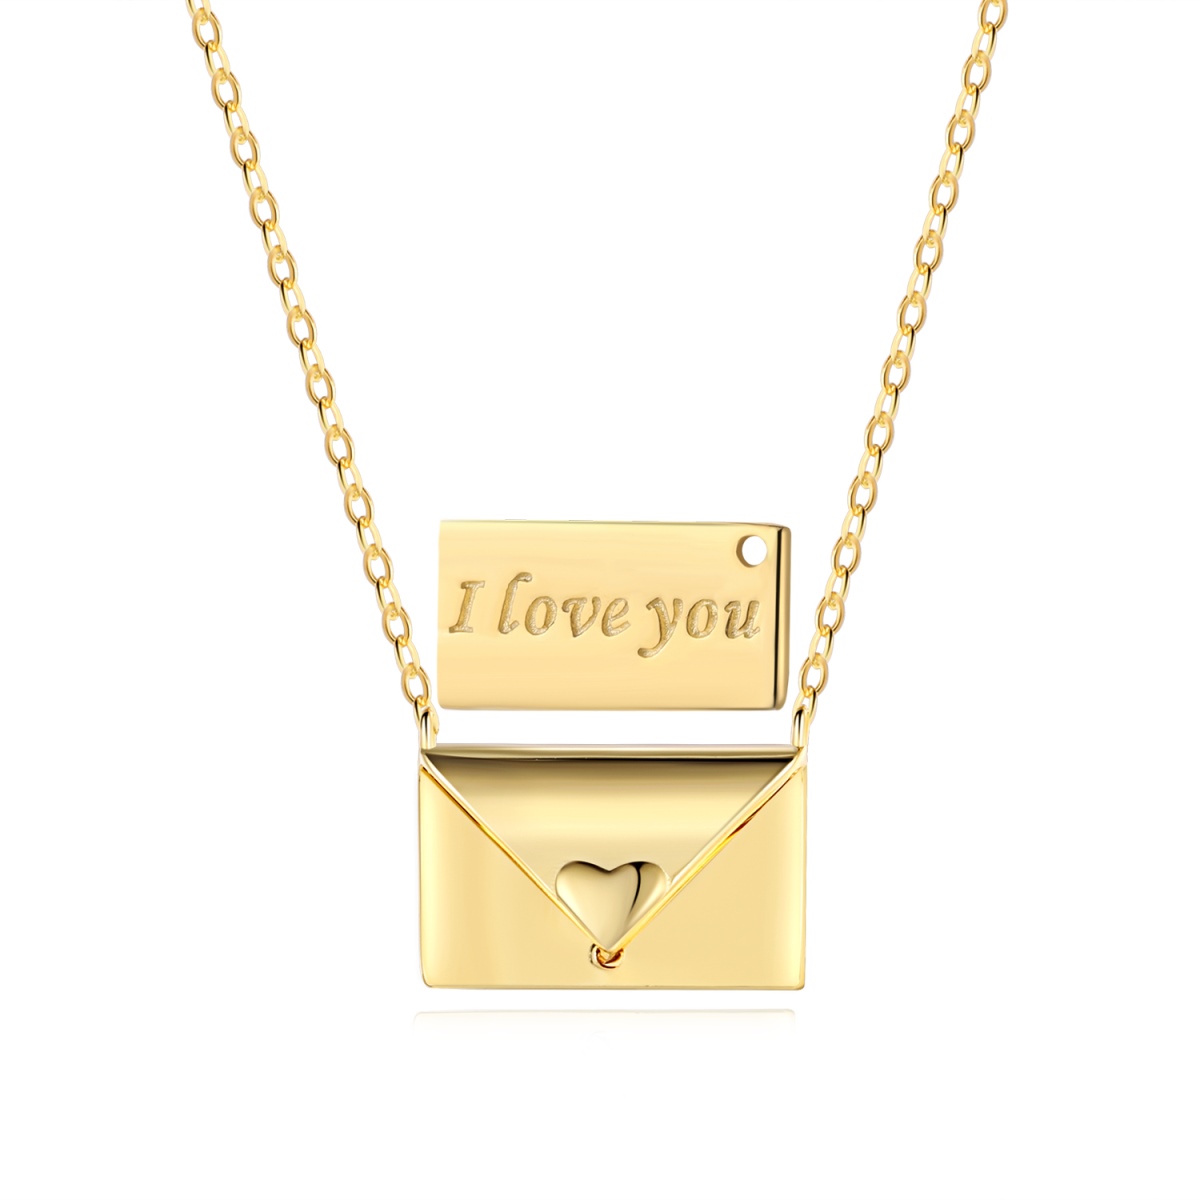 DEDEJILL I Love You Sterling Silver Necklace｜Best Gift For Her